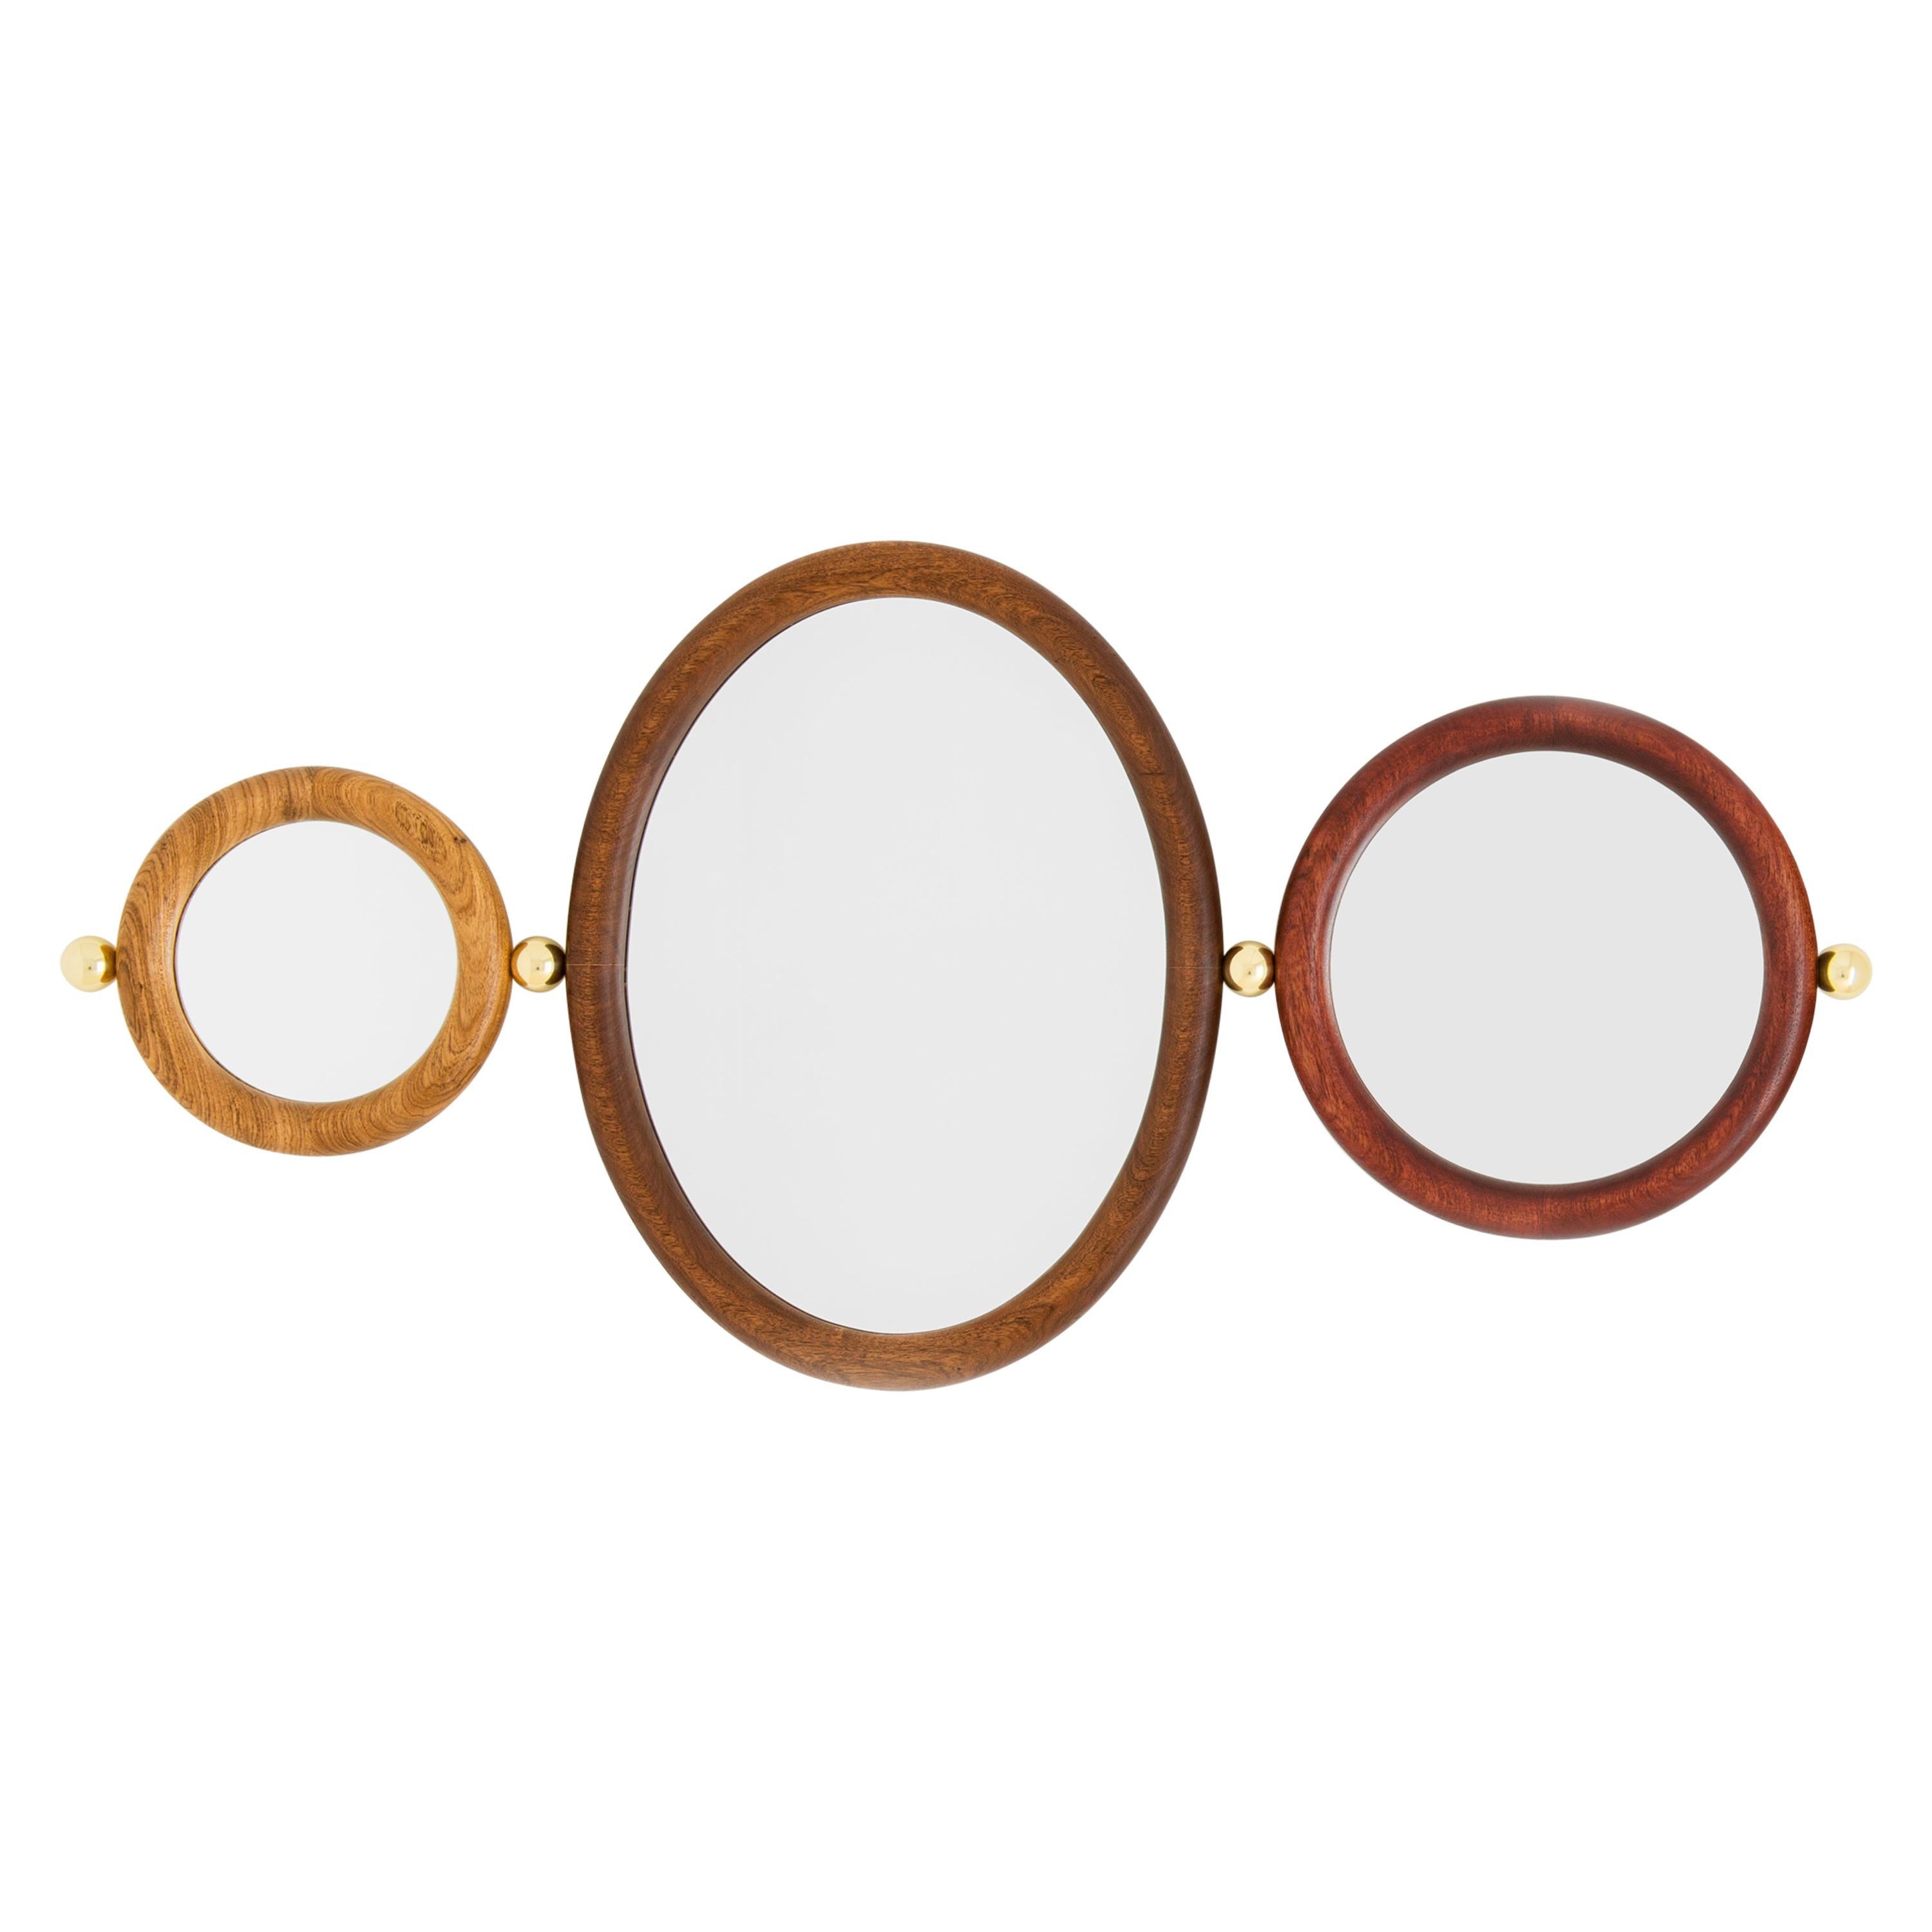 Set of 3 Aro Mirrors by Leandro Garcia Contemporary Brazil Design For Sale